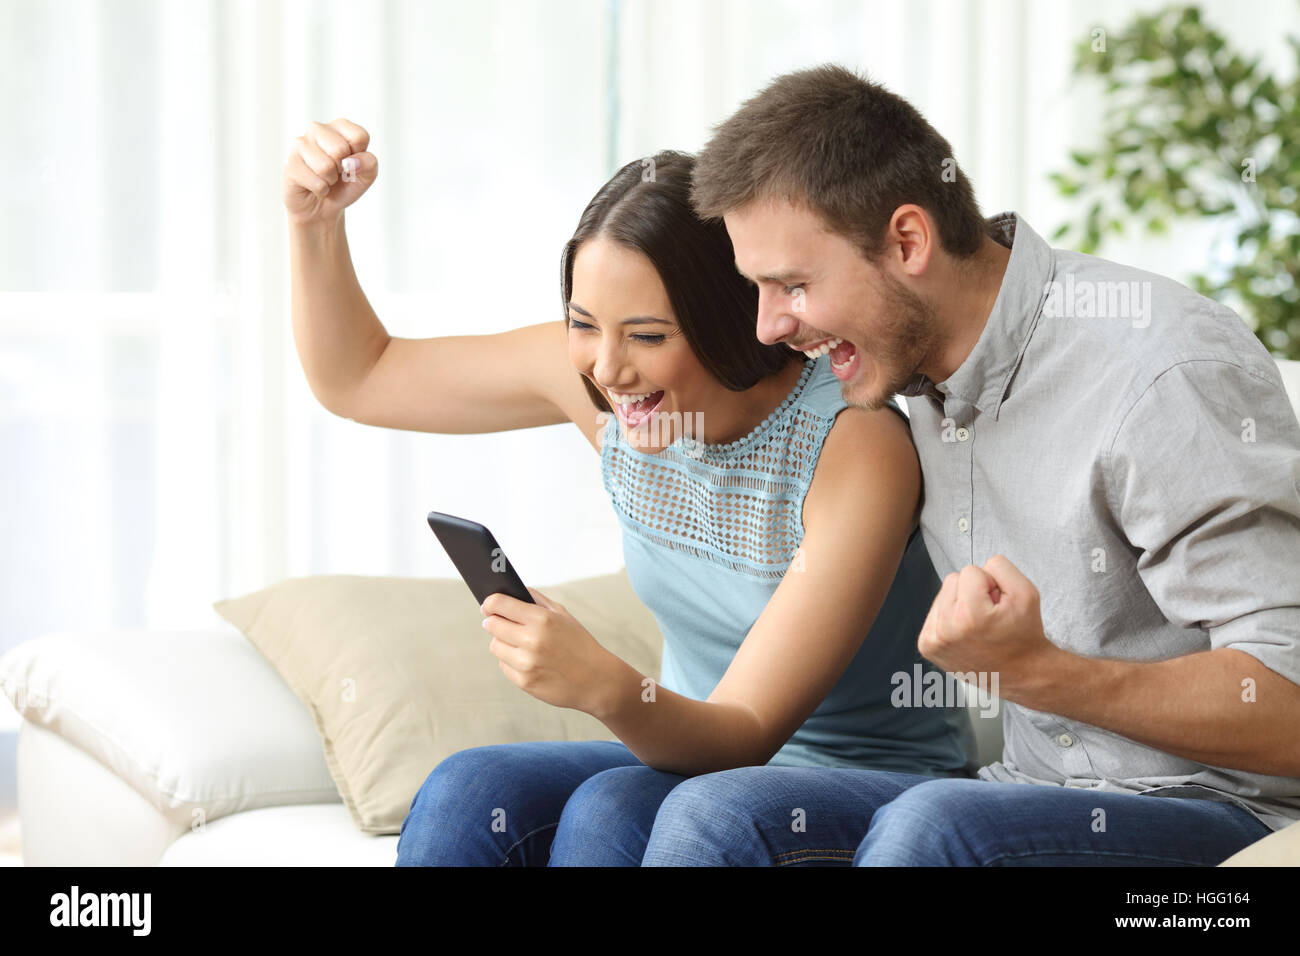 Excited couple watching media content together using a mobile phone sitting on a couch in the living room of a house Stock Photo